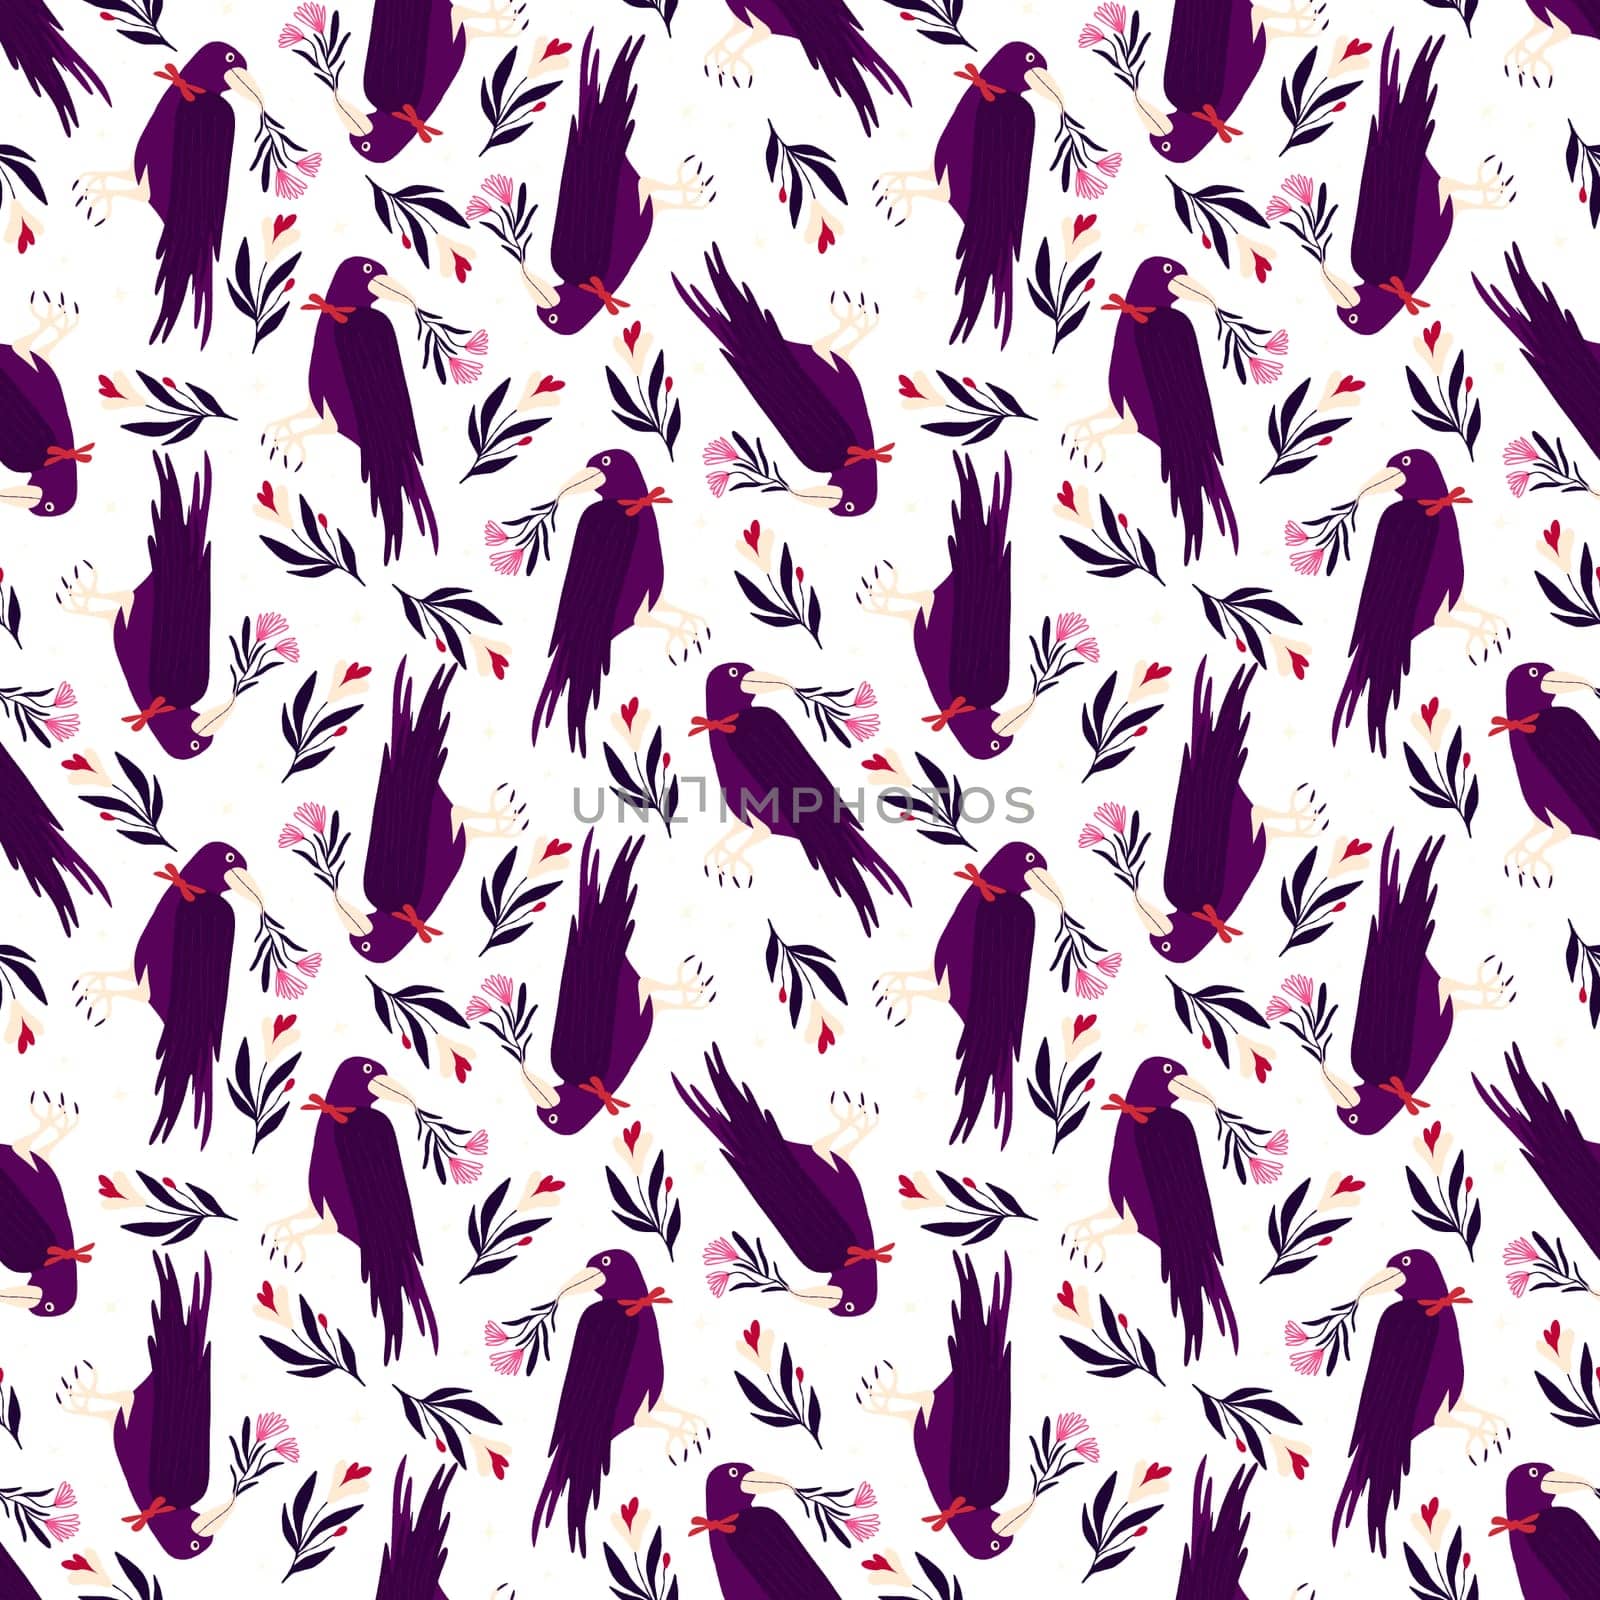 Purple cartoon Halloween seamless pattern with raven and flowers